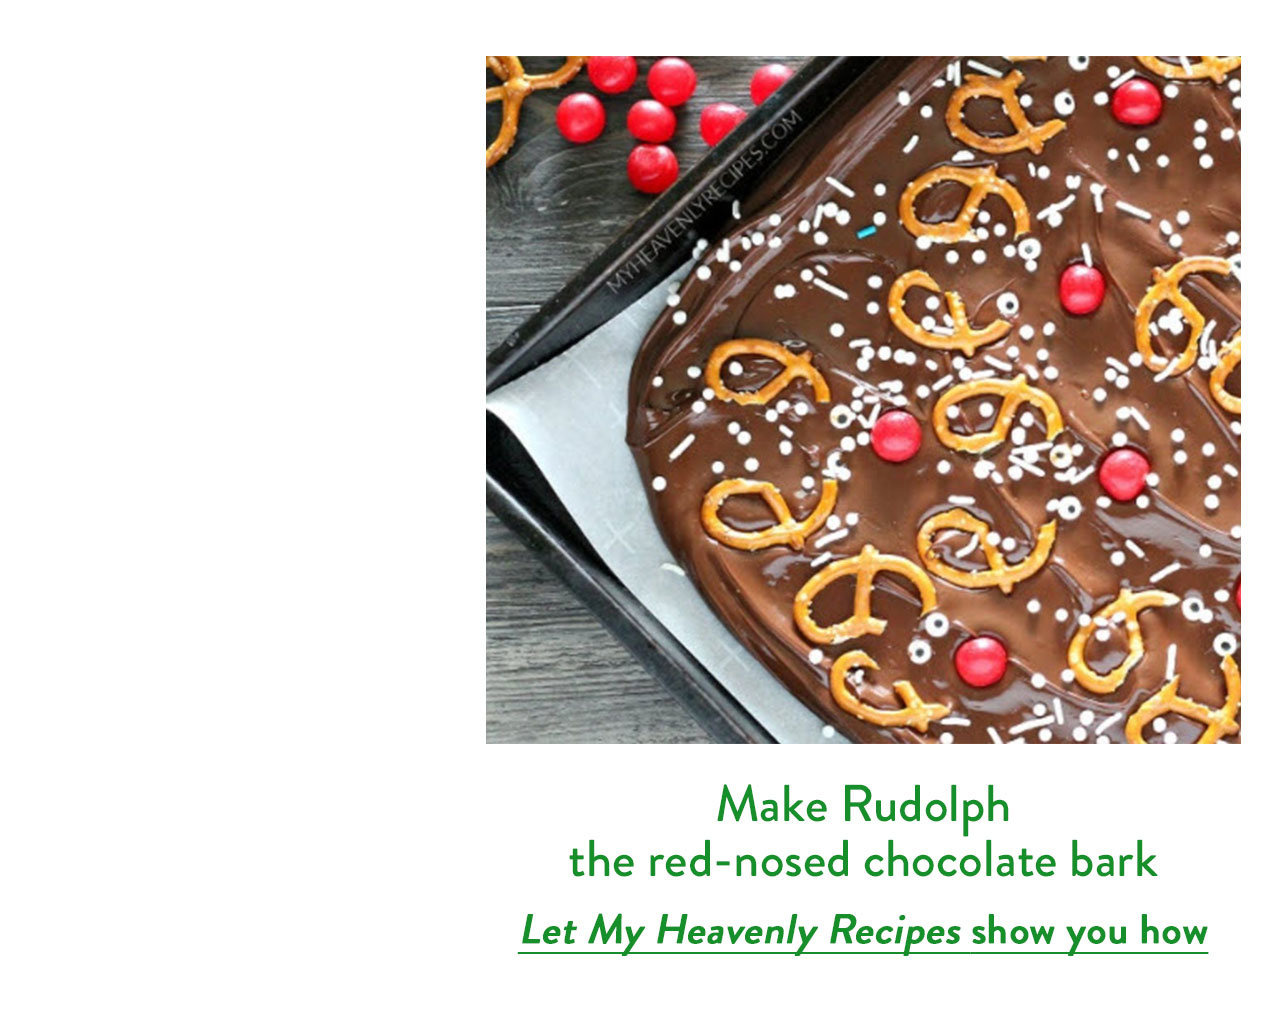 Make Rudolph the red-nosed chocolate bark